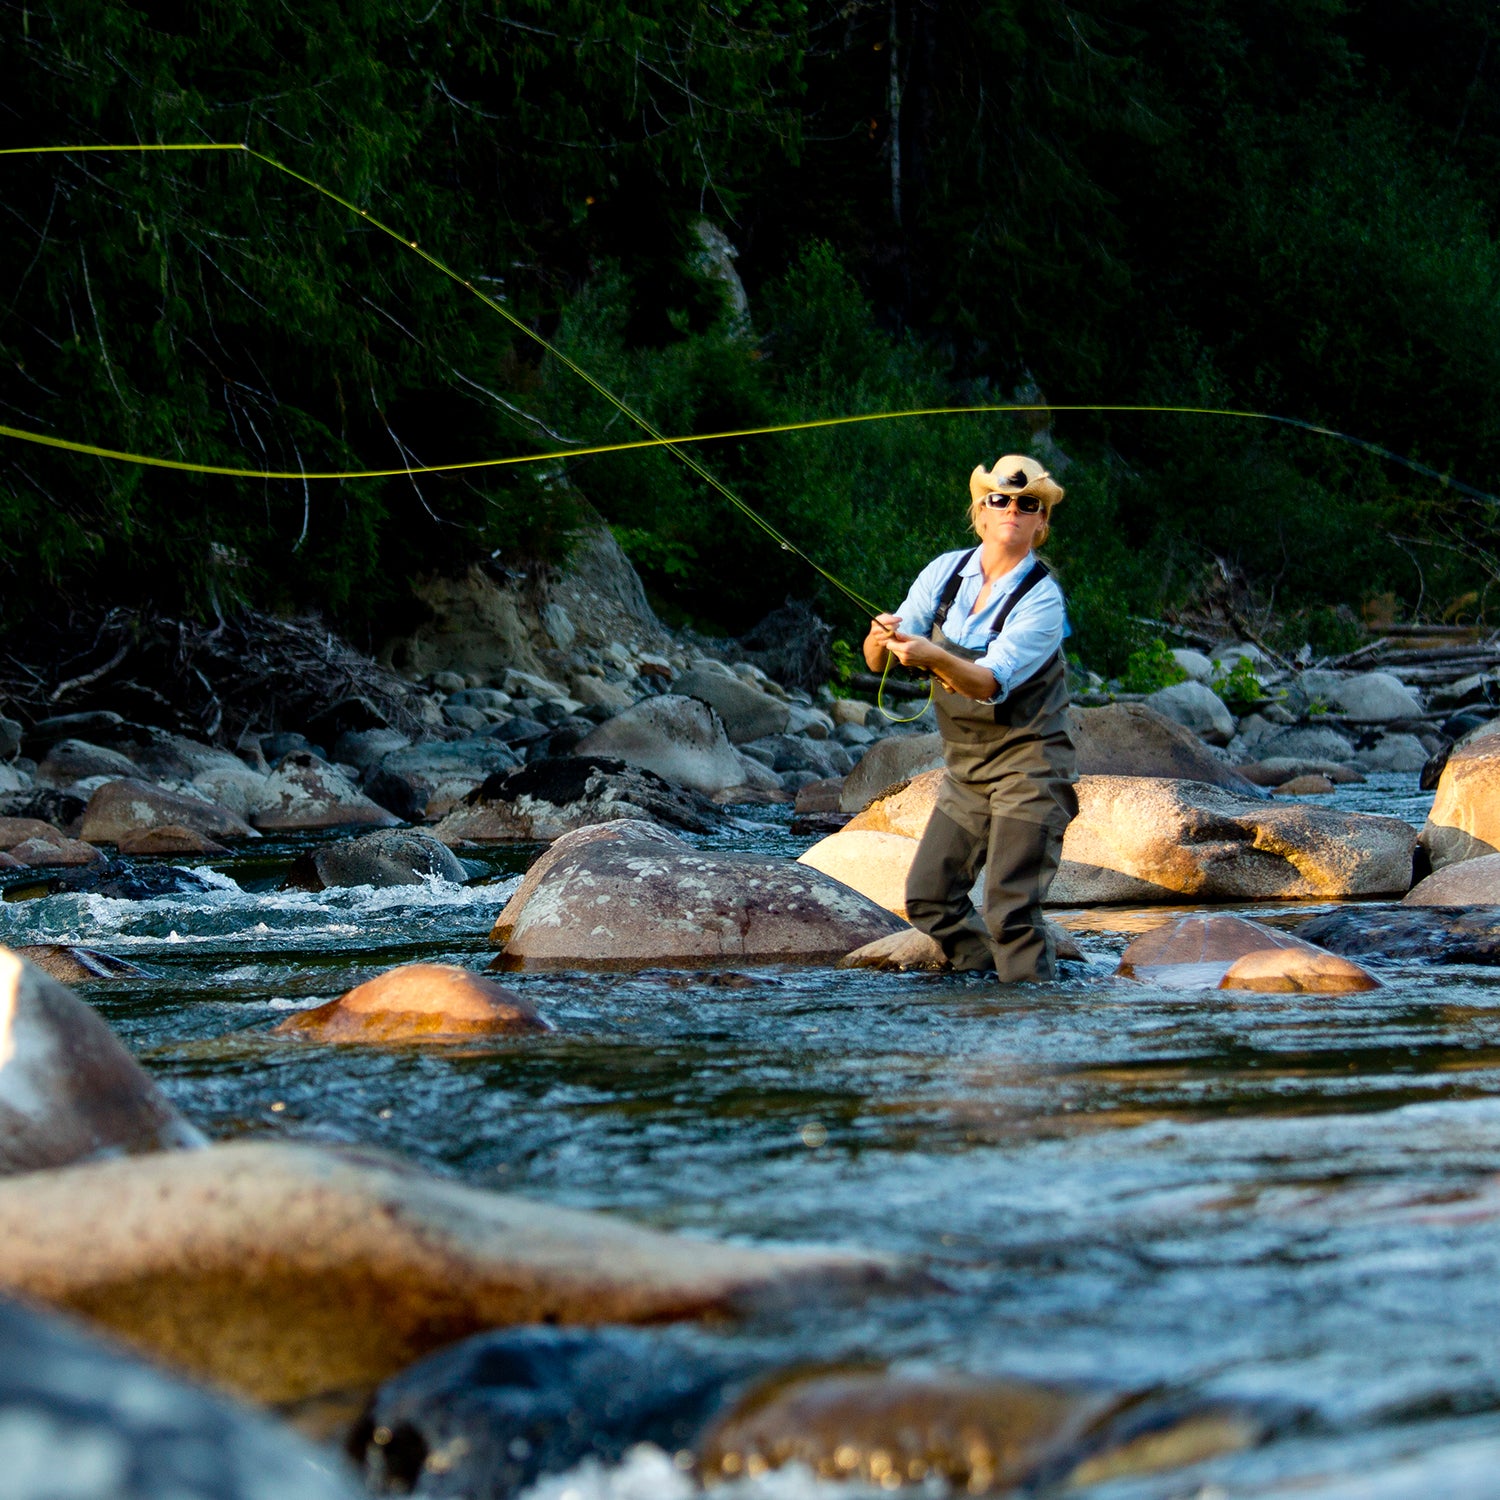 New Women's Fly Fishing Clothing & Gear by Patagonia